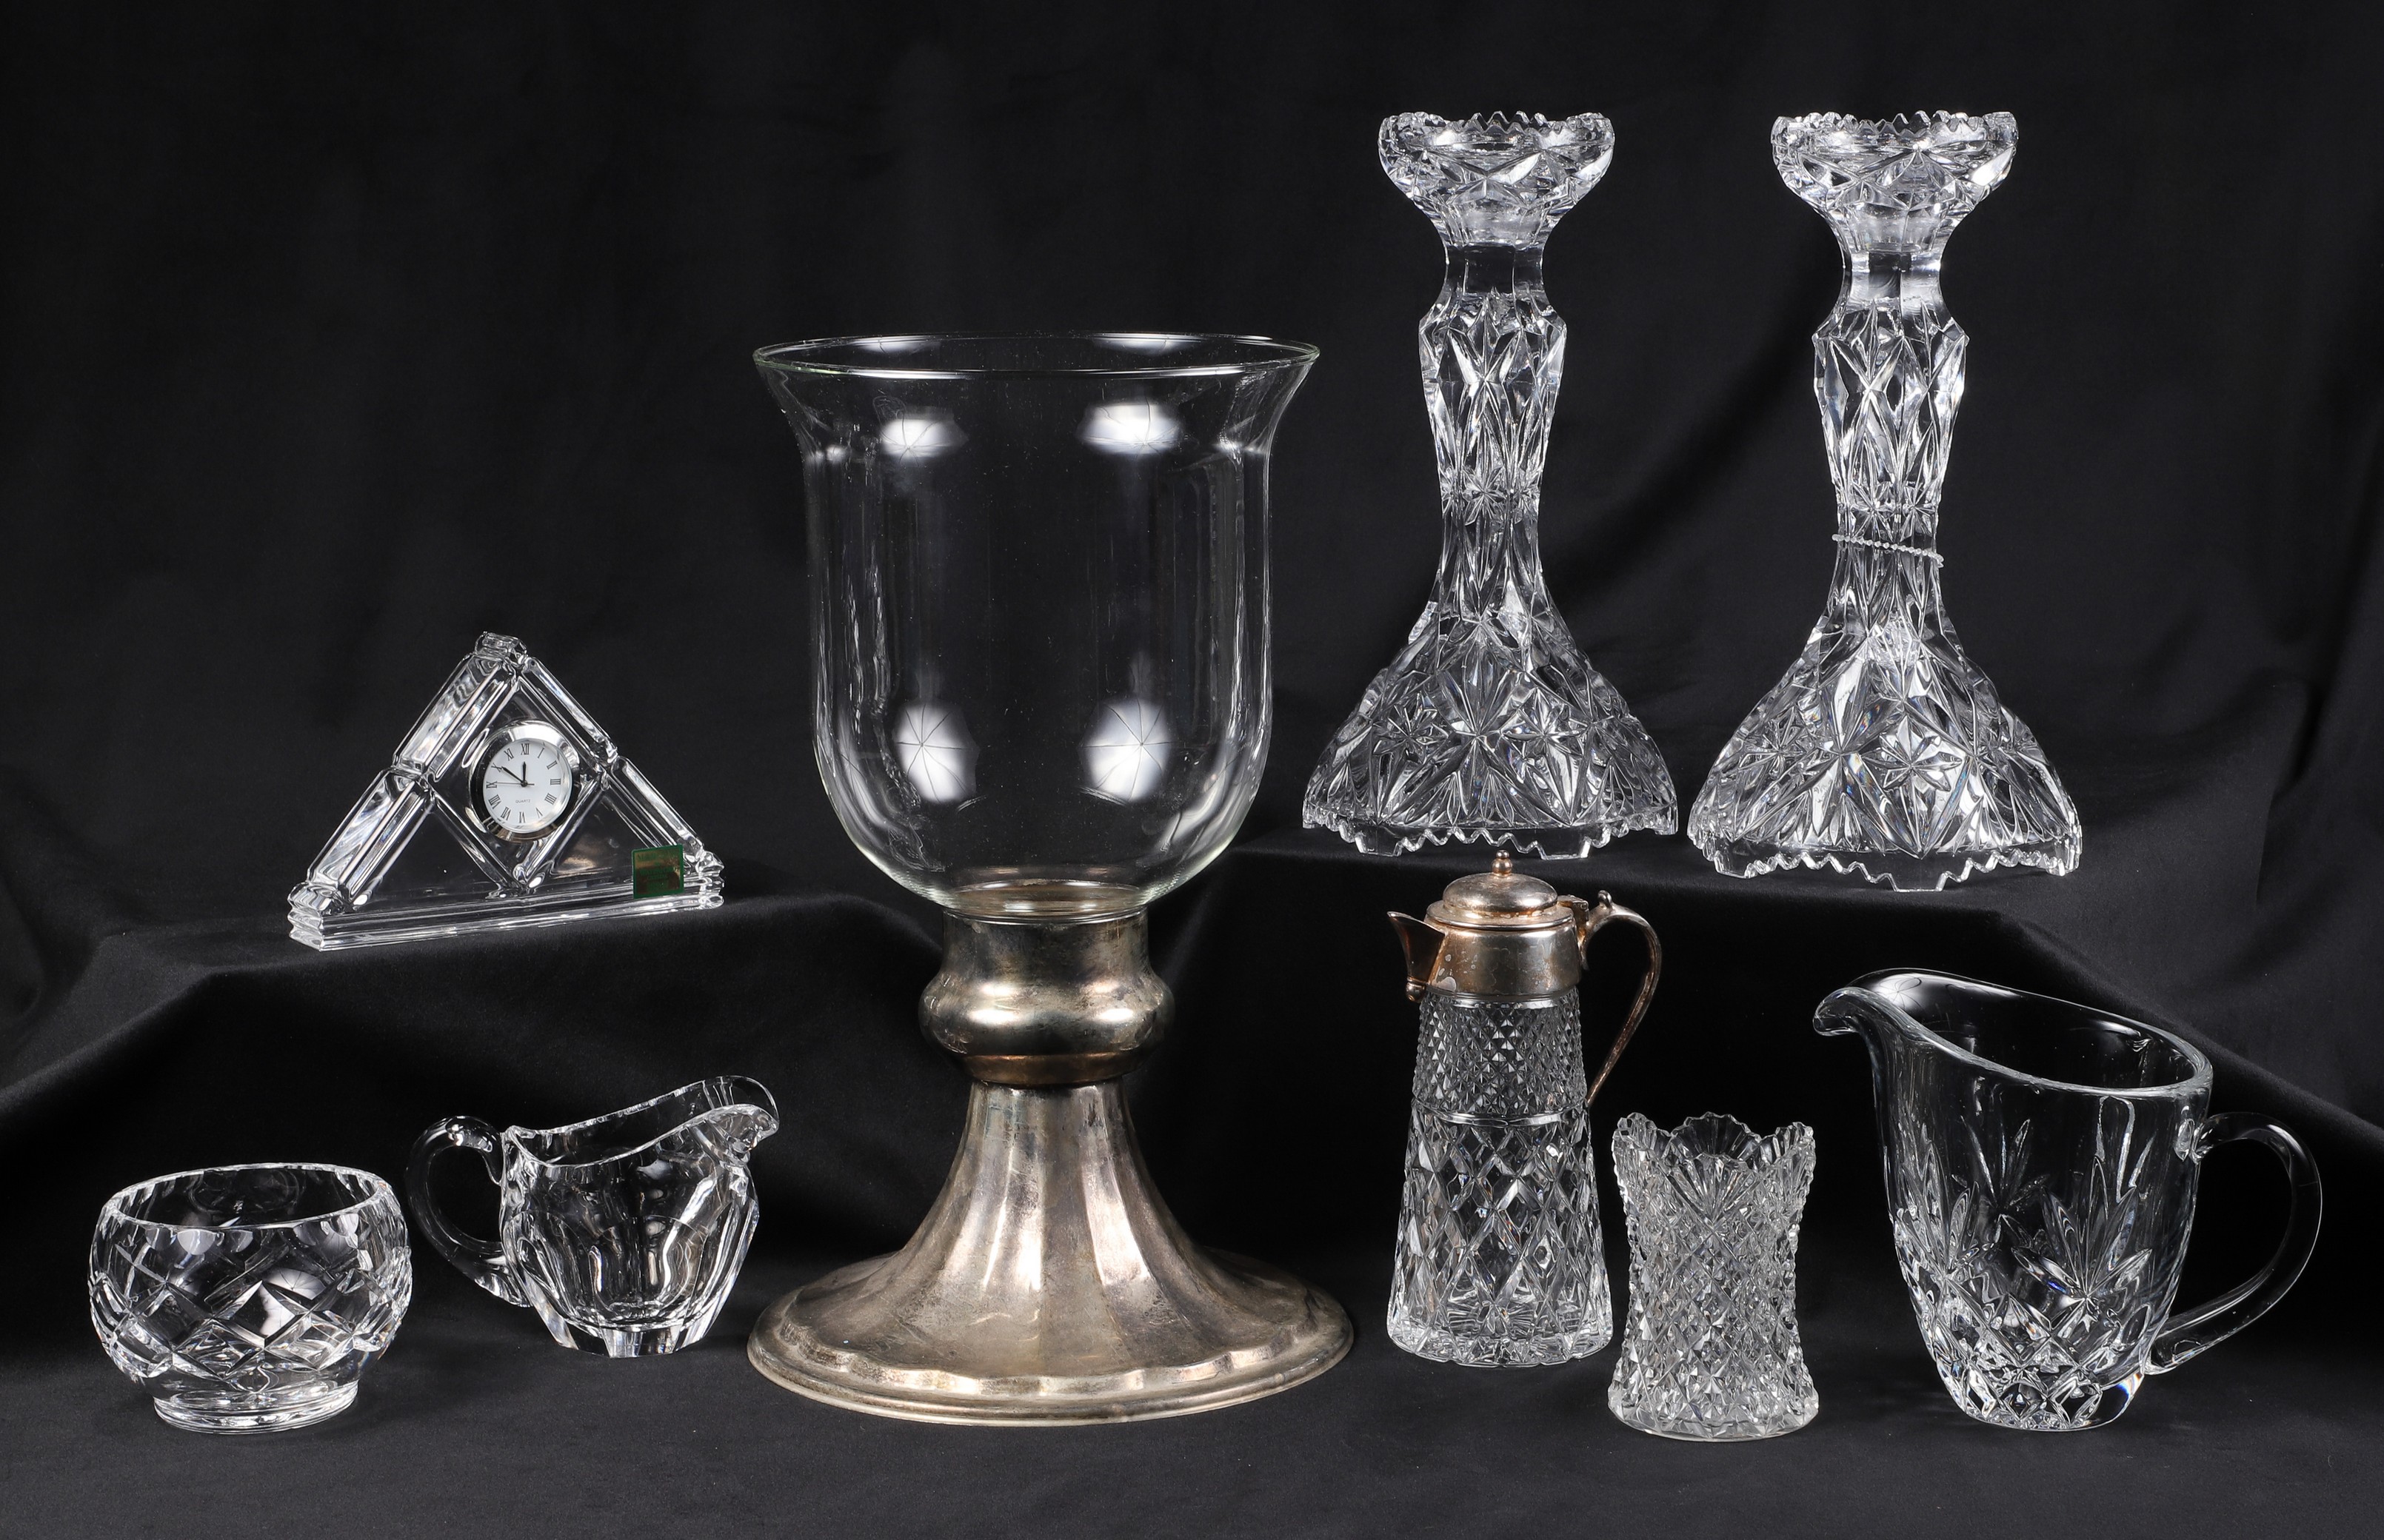 Glass and silver plate grouping 2e1334